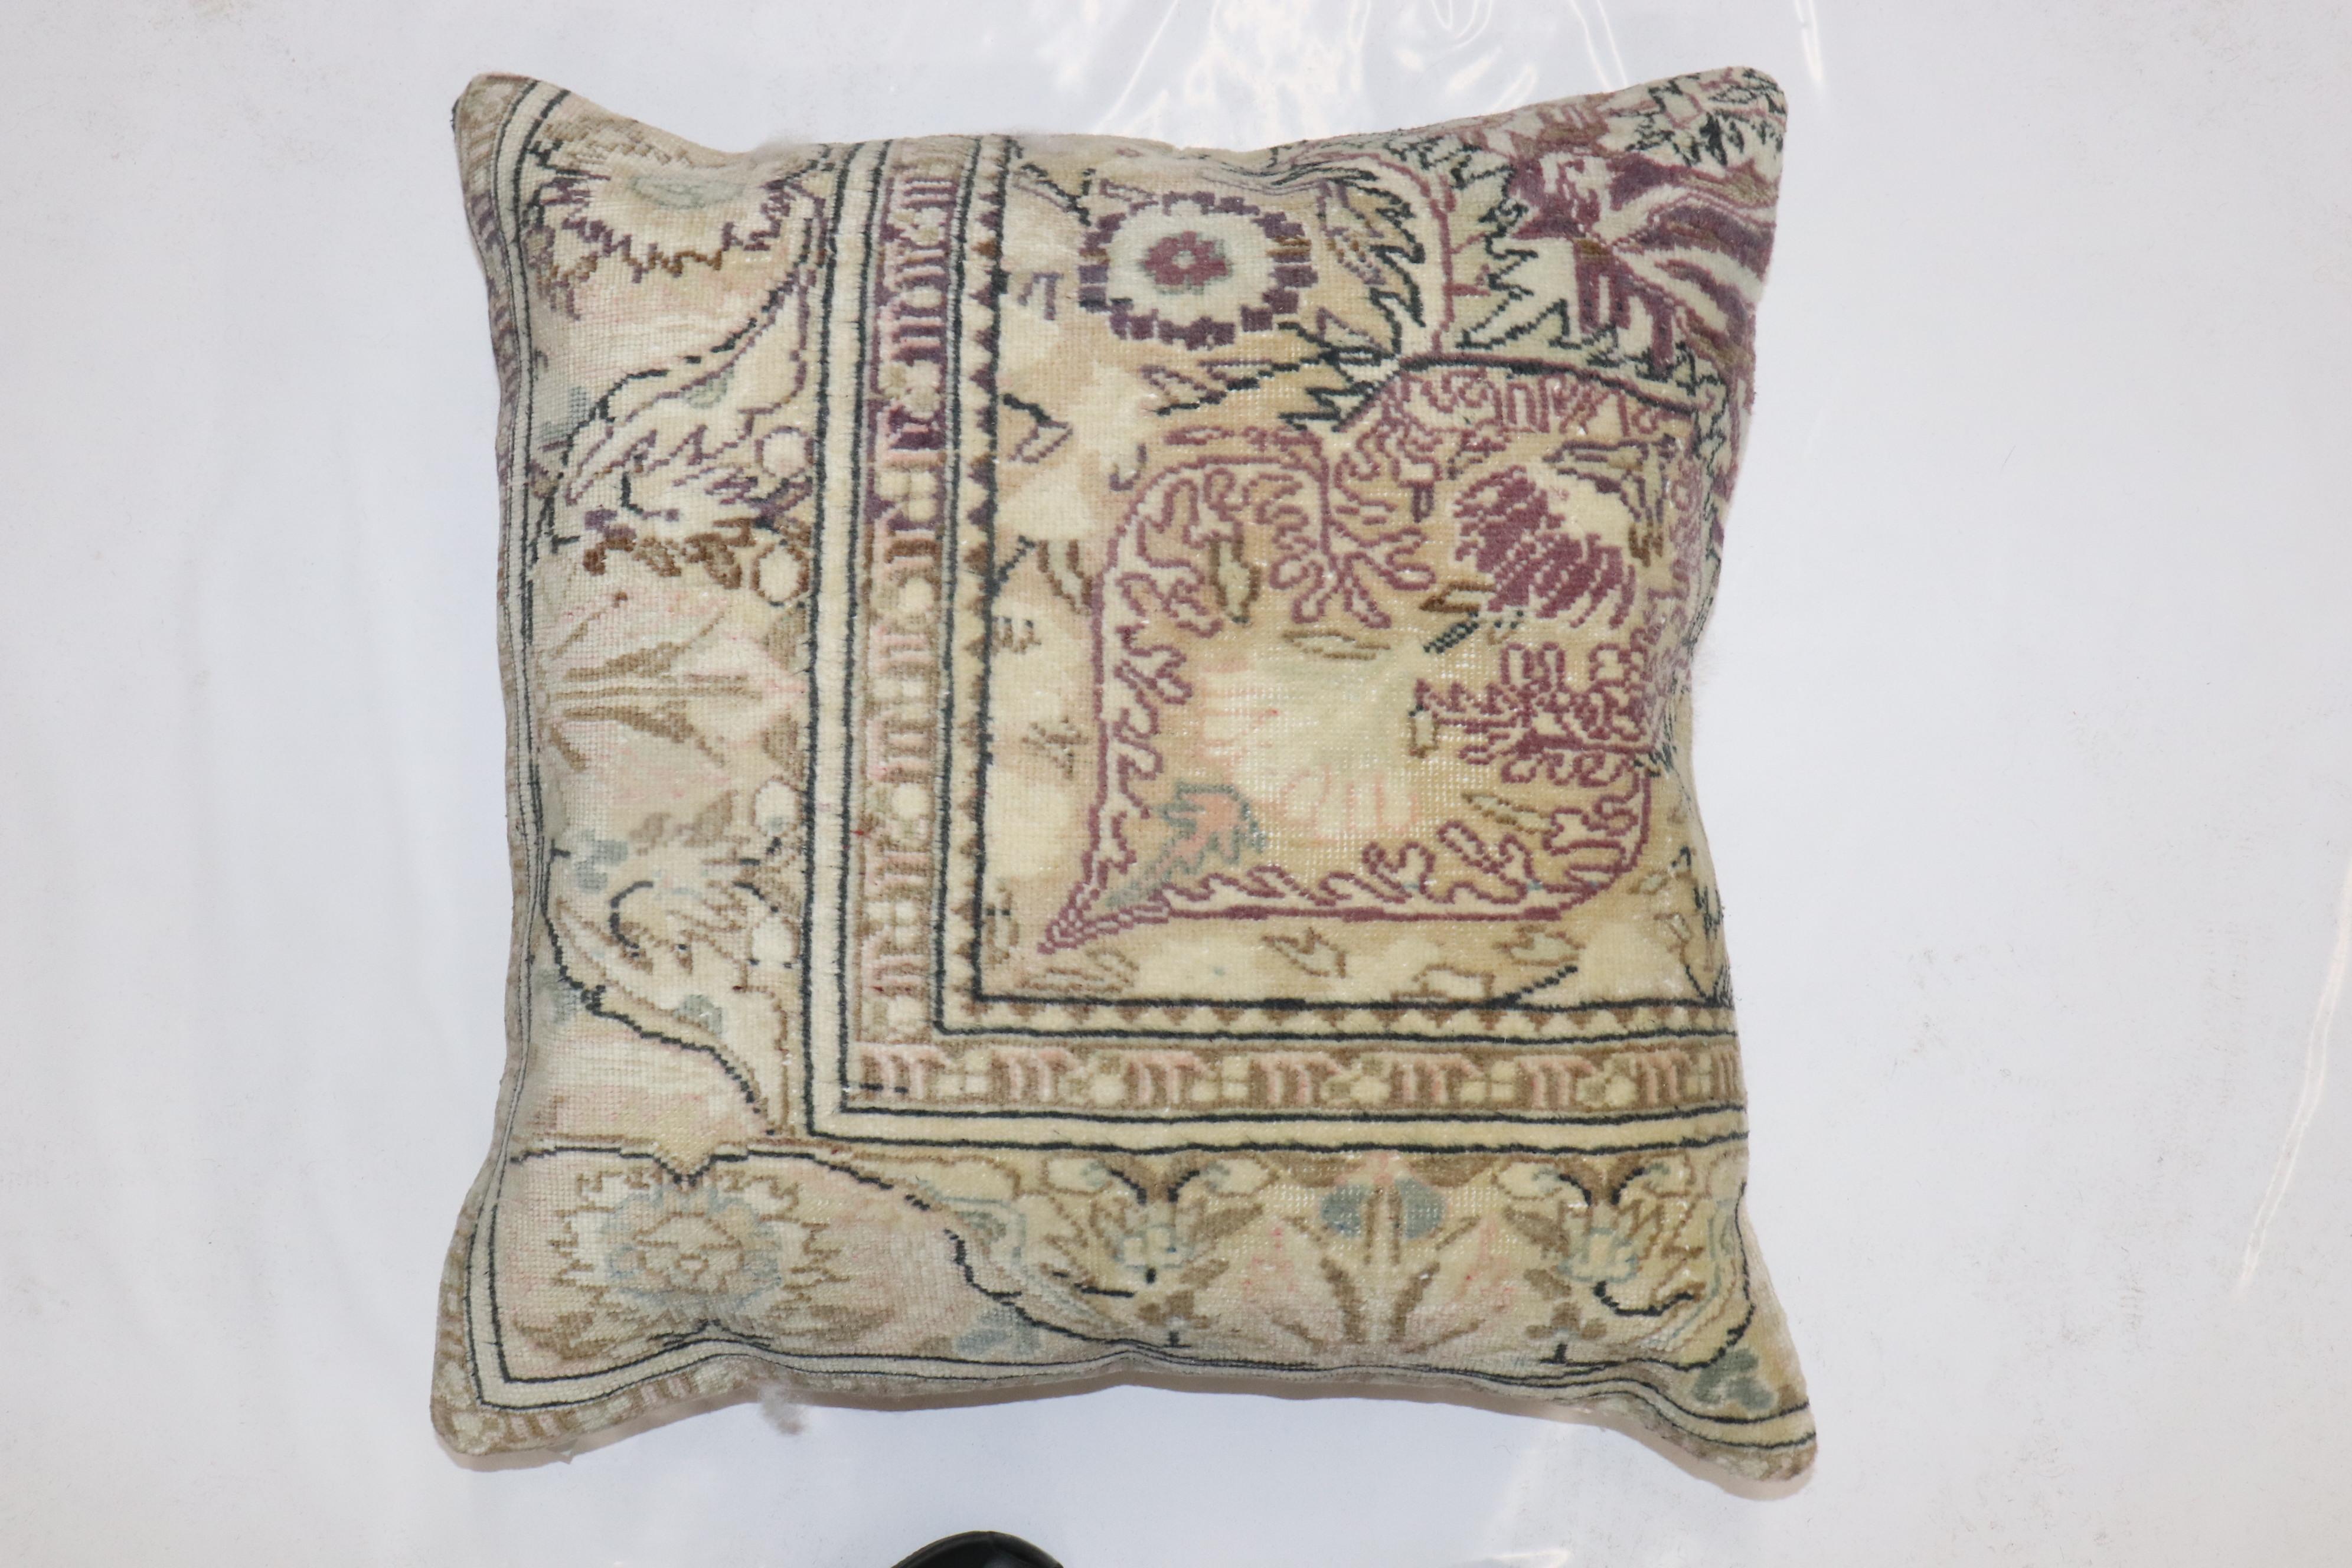 Pillow made from a mid-20th-century Turkish Keysari rug in a bolster size. zipper closure and polyfill insert provided

Measures: 23'' x 24''.